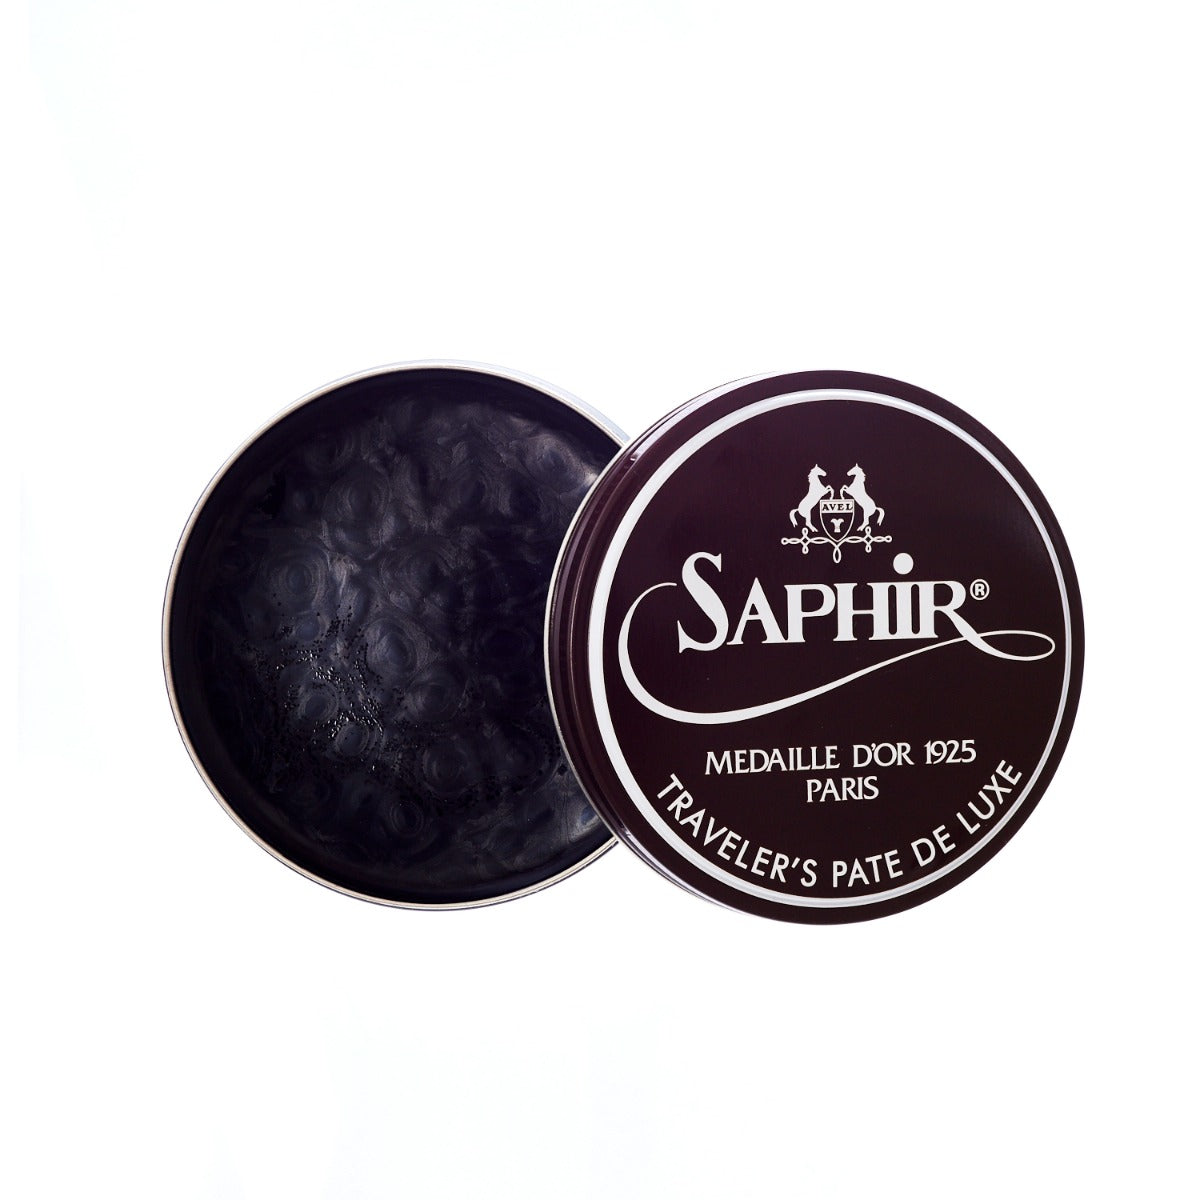 A tin of Saphir Traveler's Pate de Luxe Wax Shoe Polish by KirbyAllison.com on a white background.